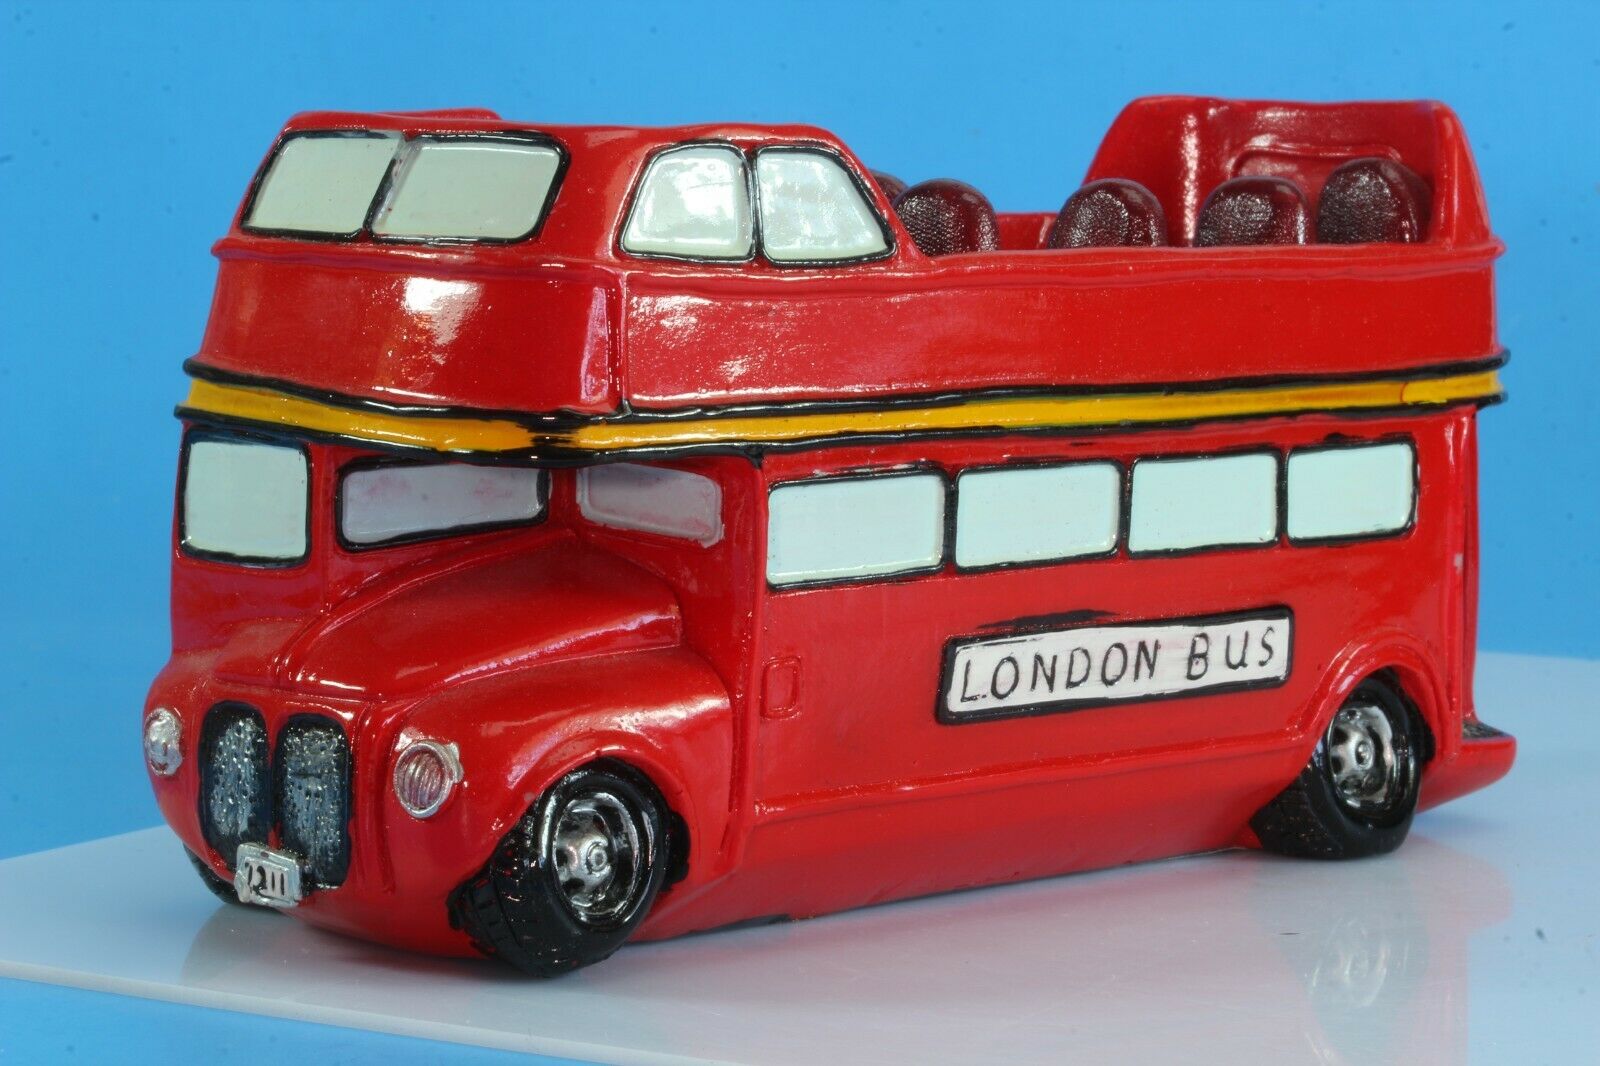 Ceramic Pottery Double Deck London Bus Coin Bank By Turtle King Corporation.